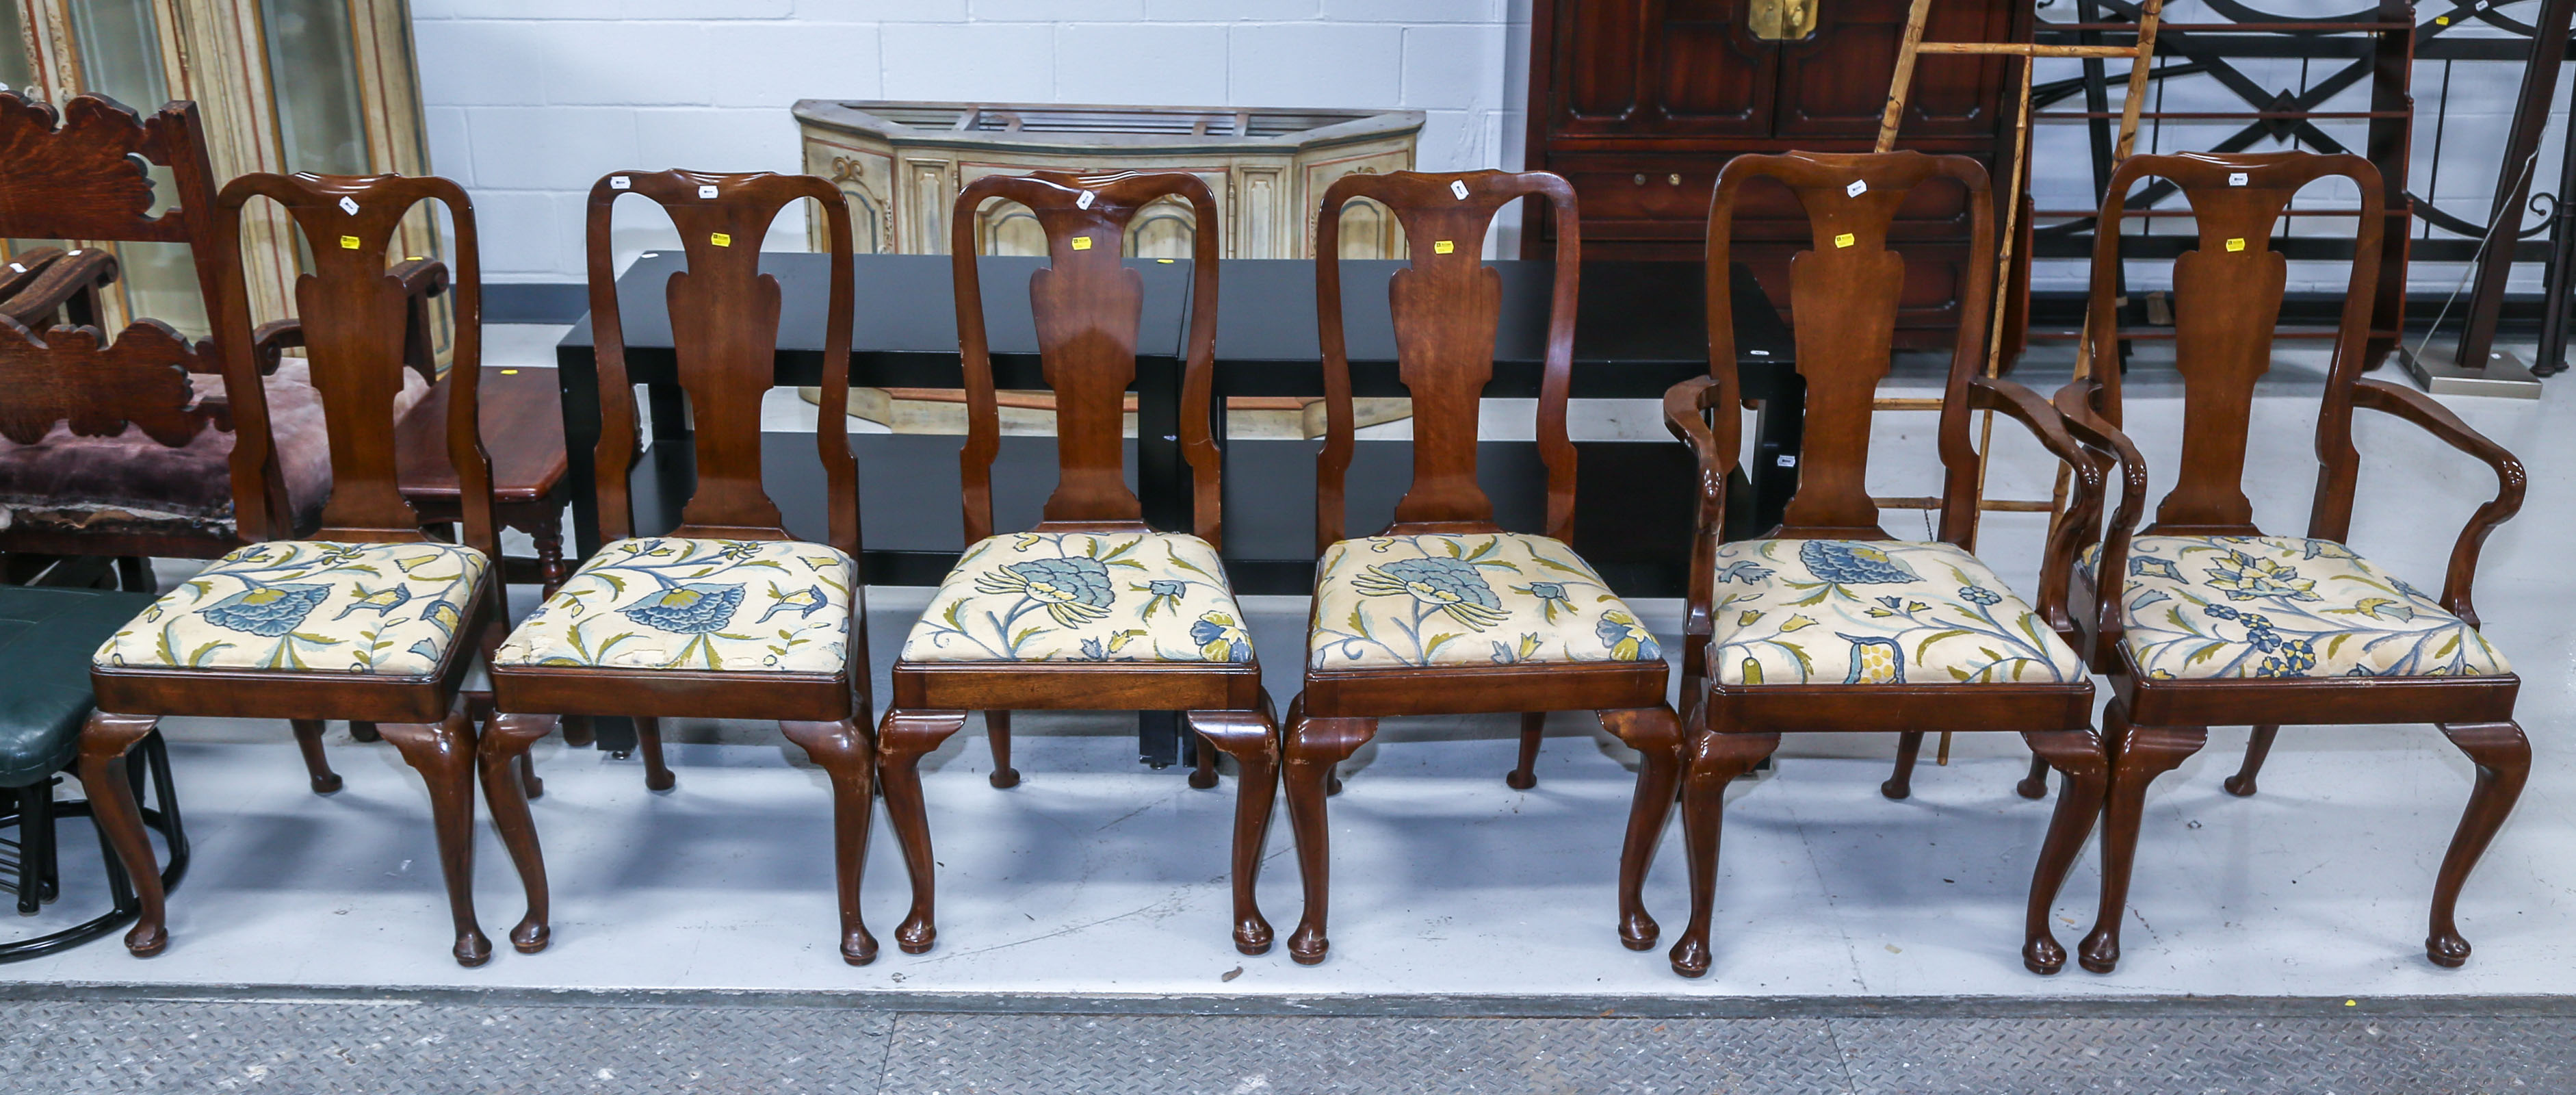 SET OF SIX QUEEN ANNE STYLE DINING